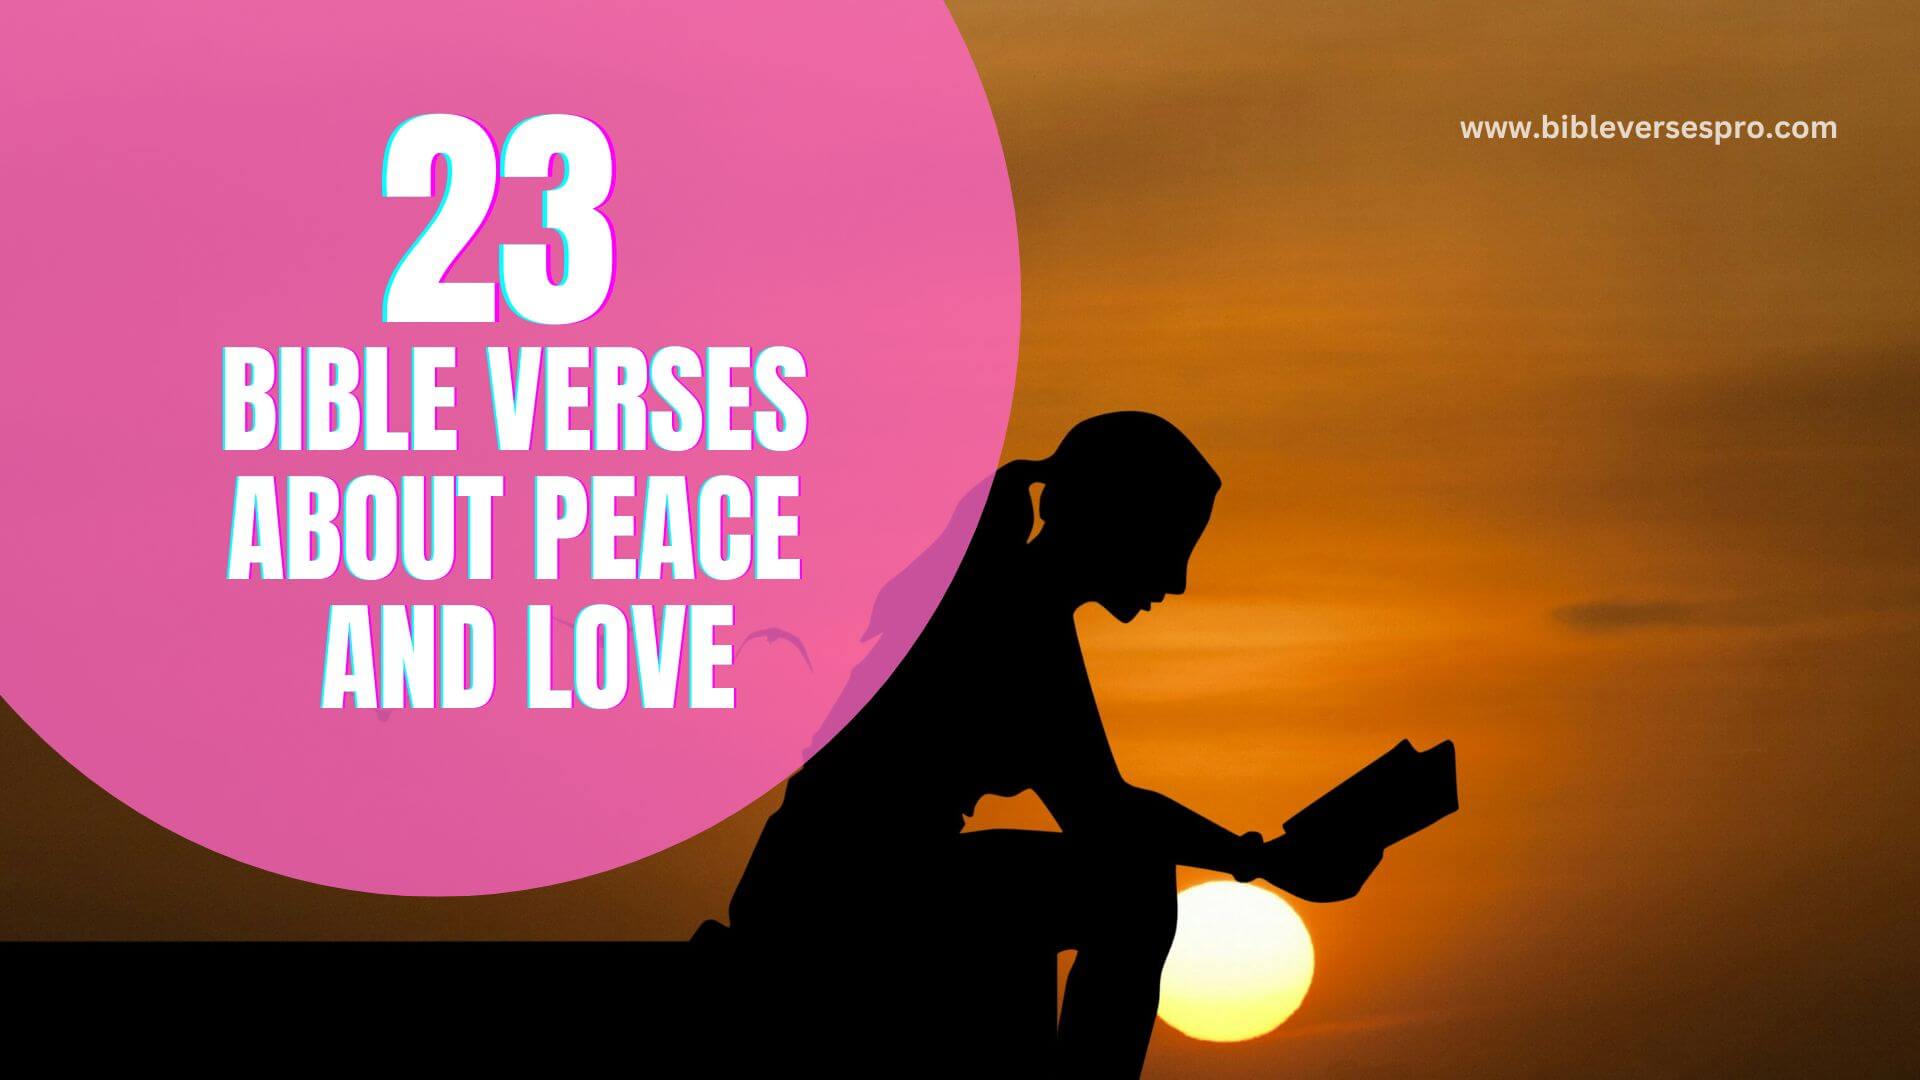 BIBLE VERSES ABOUT PEACE AND LOVE